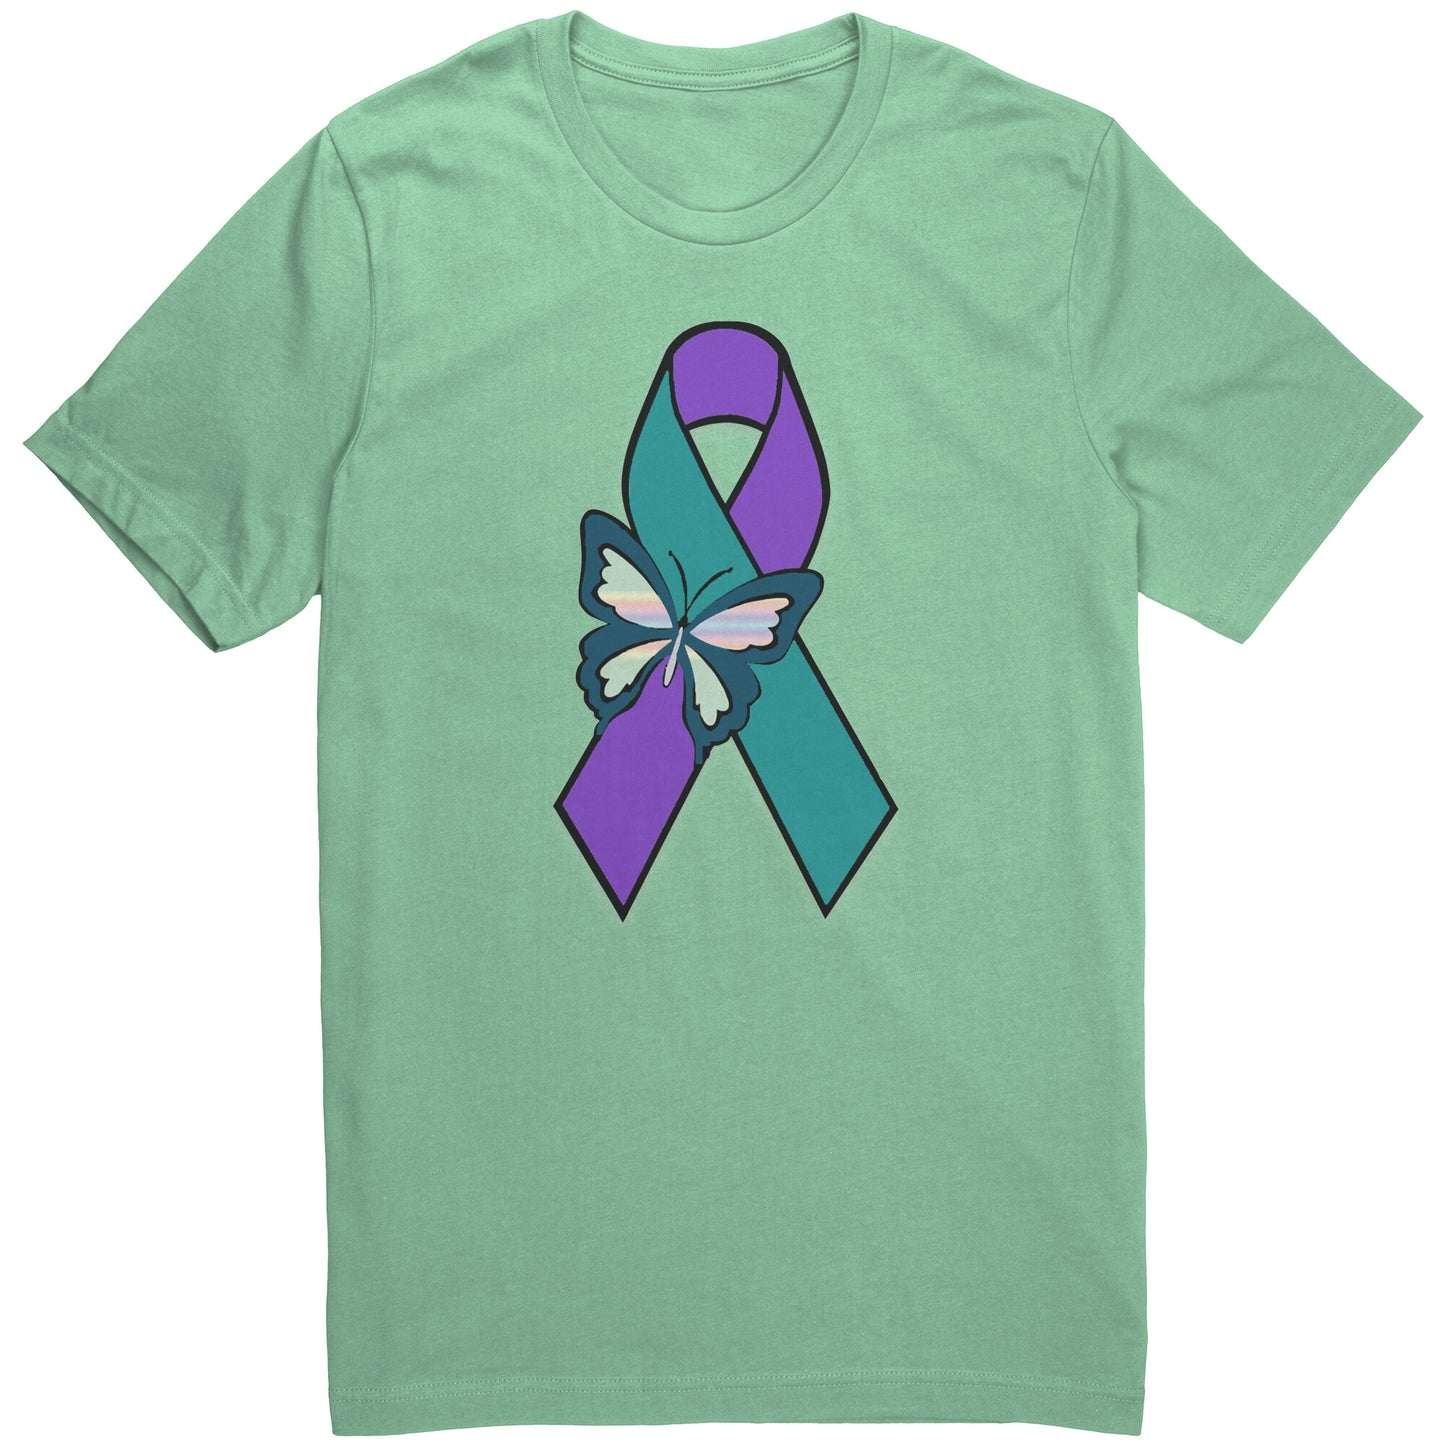 Suicide Awareness Butterfly Ribbon T-Shirt